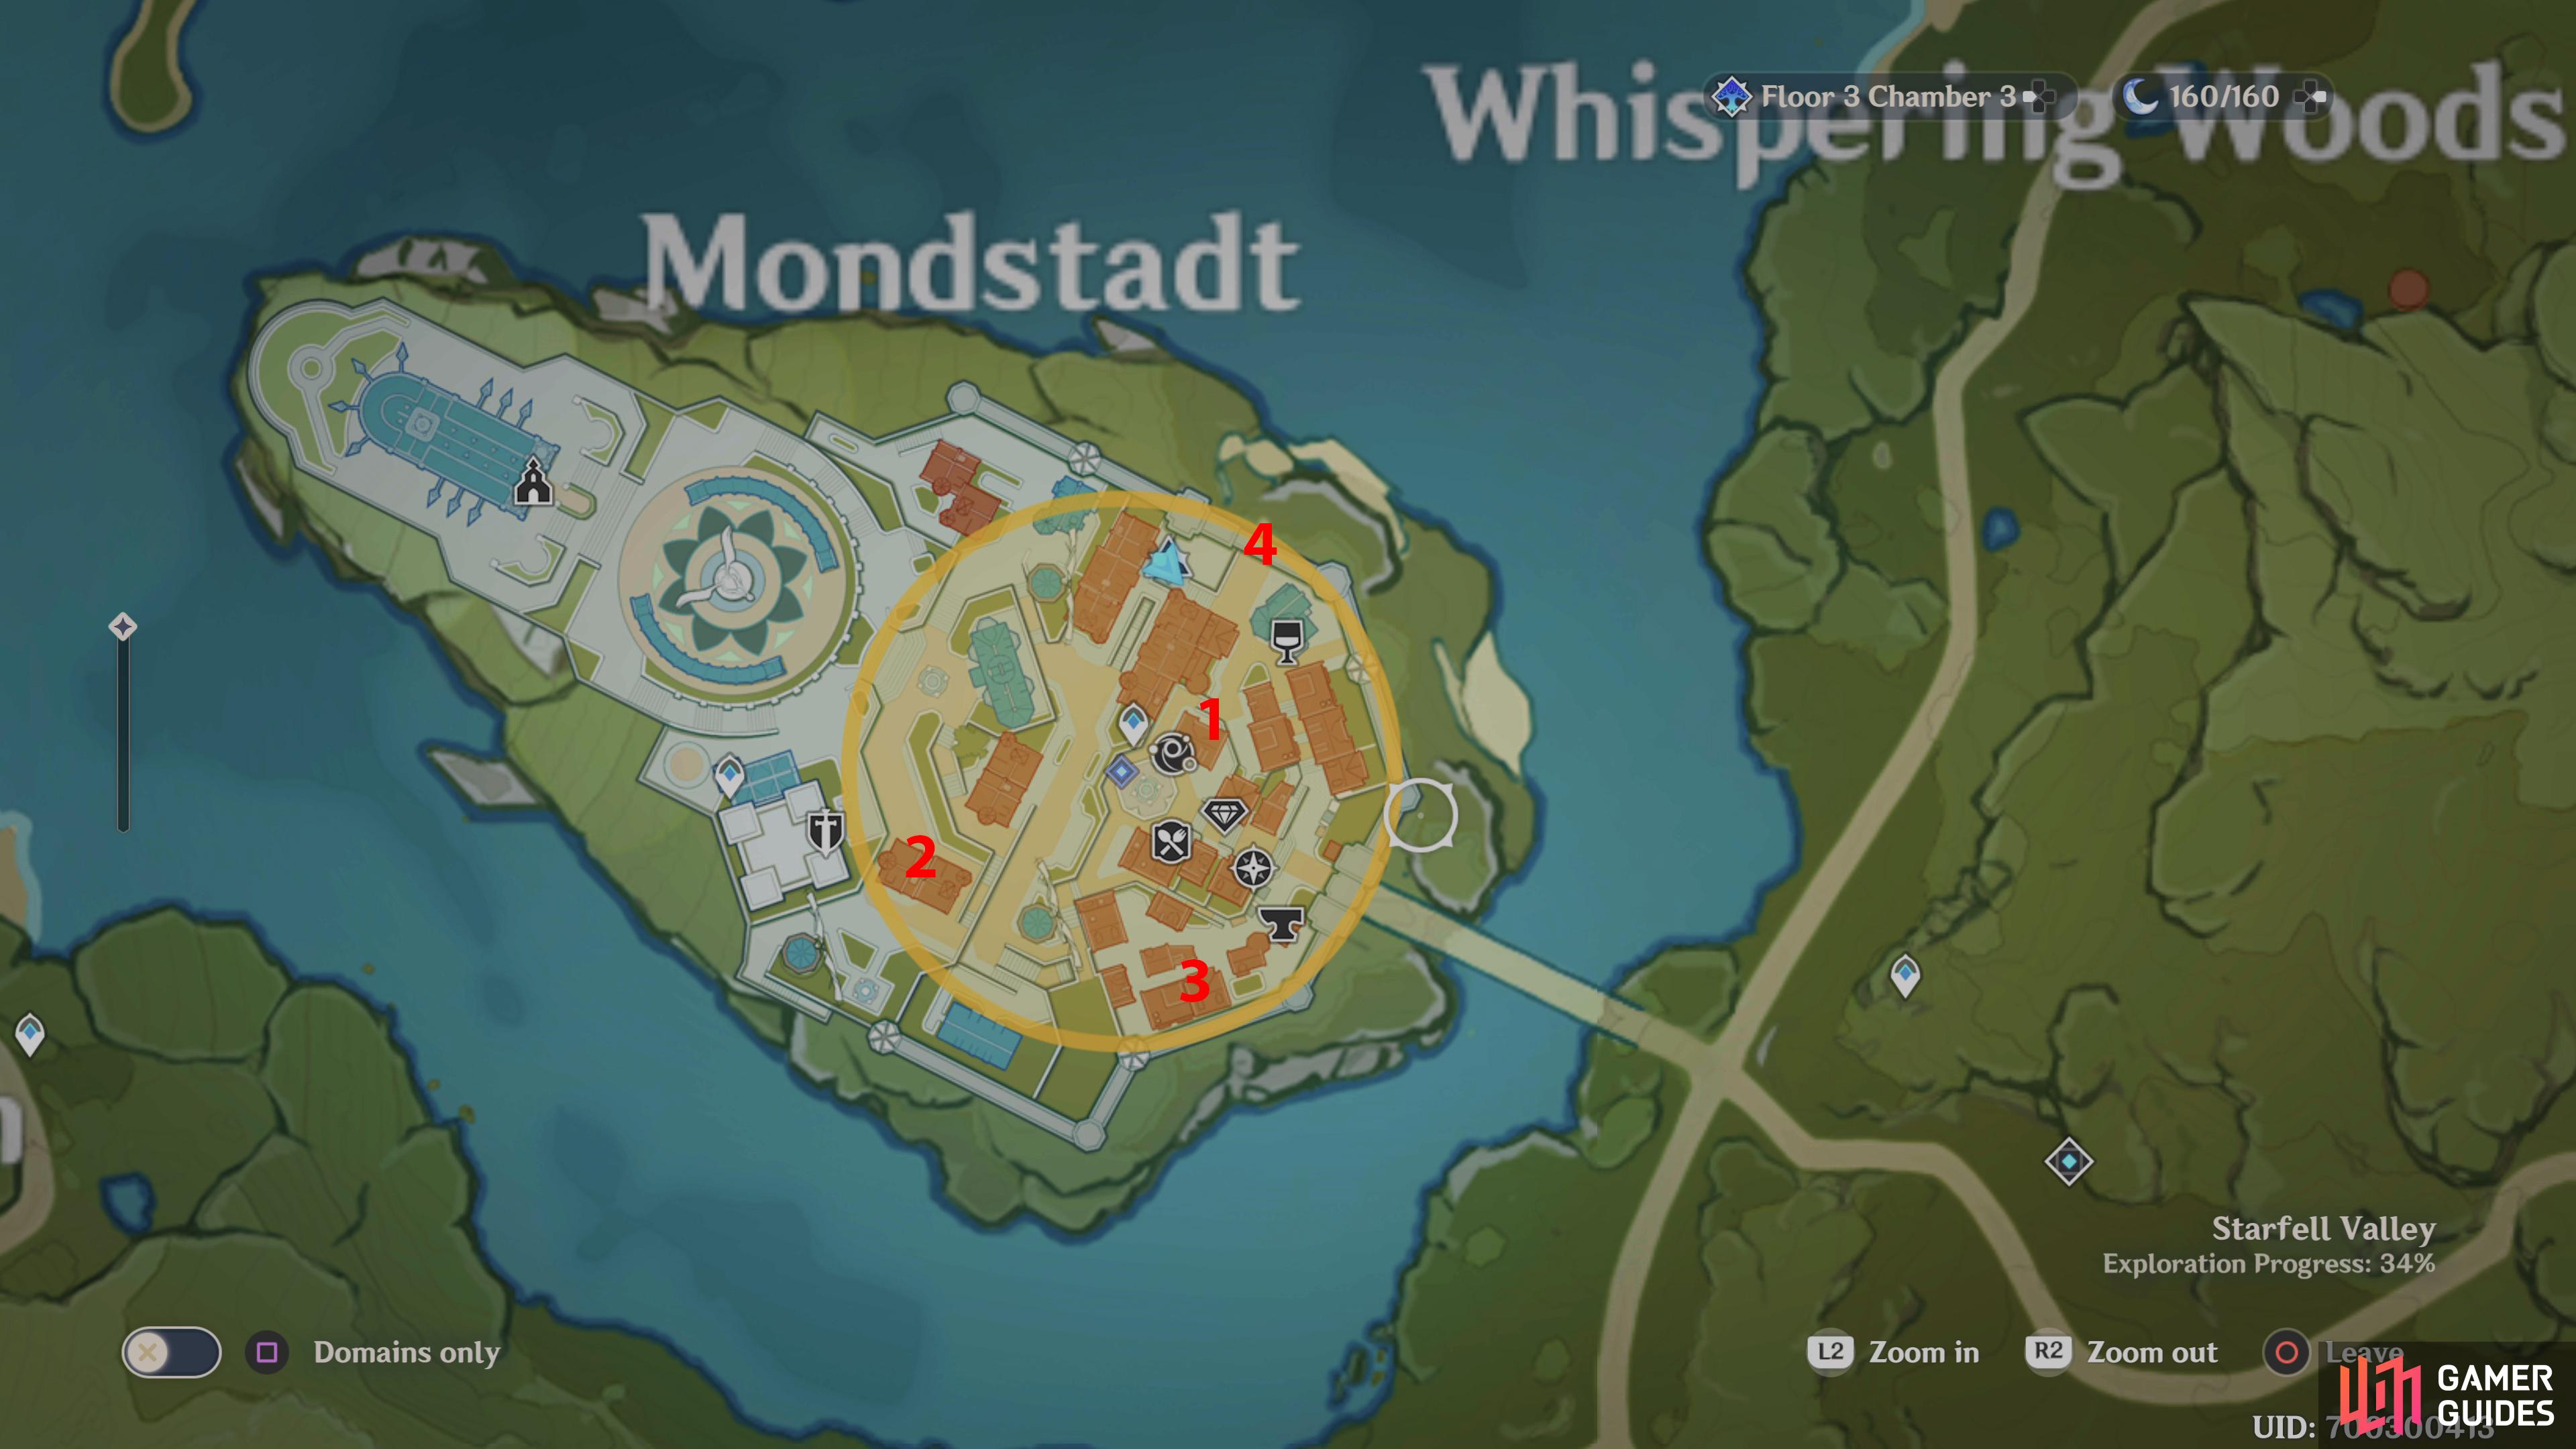 All four items can be seen on this map